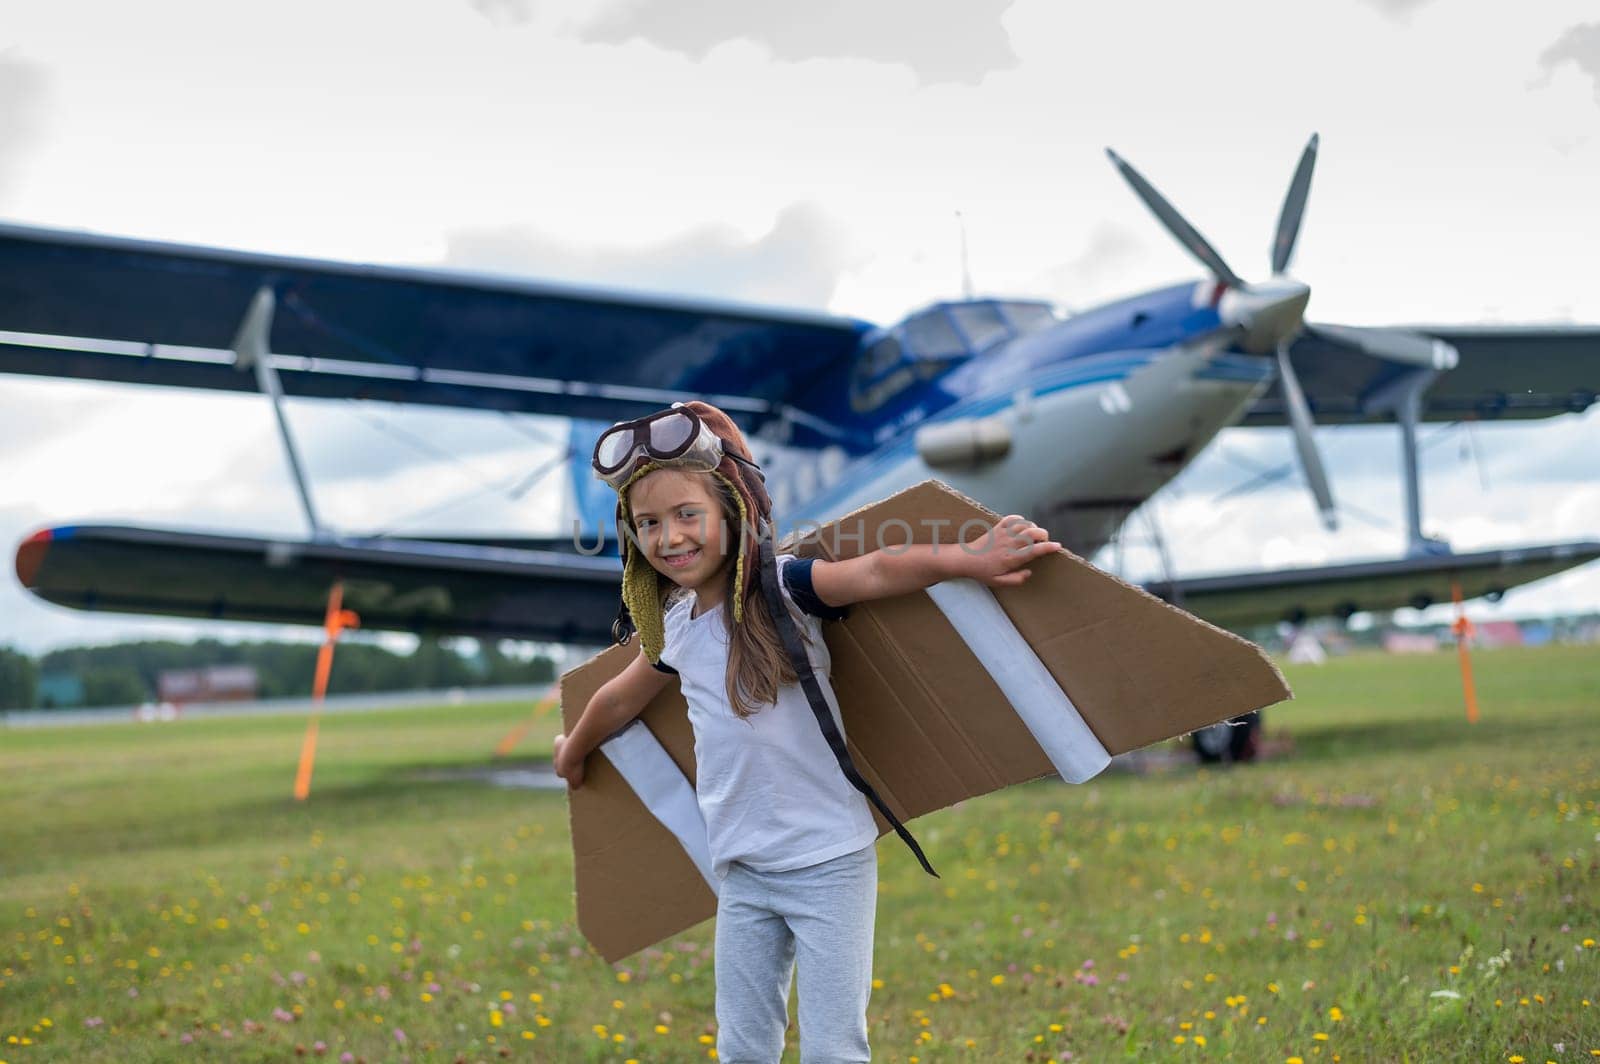 A little girl plays a pilot on the background of a small plane with a propeller. A child in a suit with cardboard wings dreams of flying by mrwed54